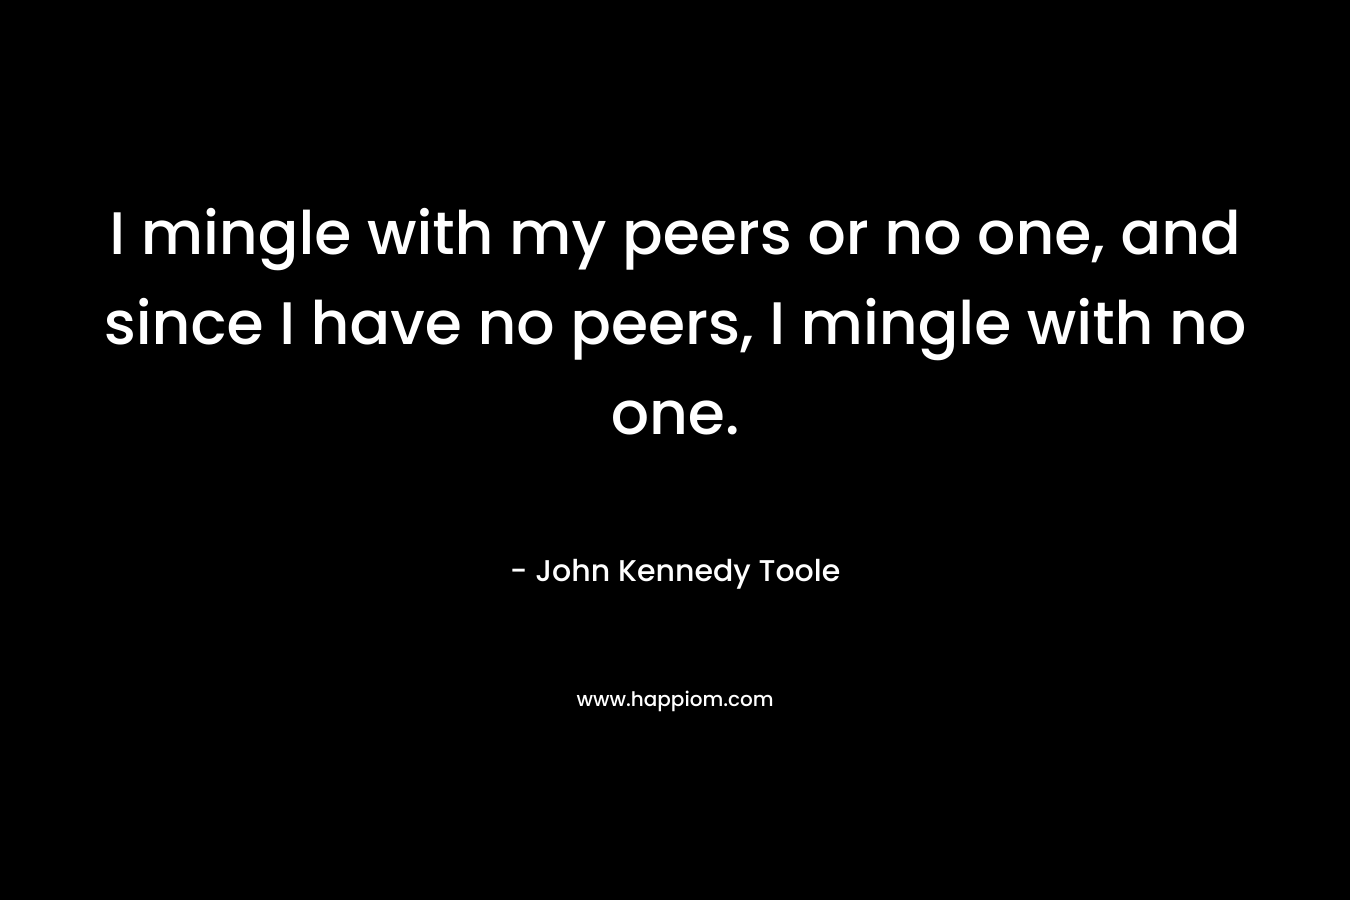 I mingle with my peers or no one, and since I have no peers, I mingle with no one. – John Kennedy Toole